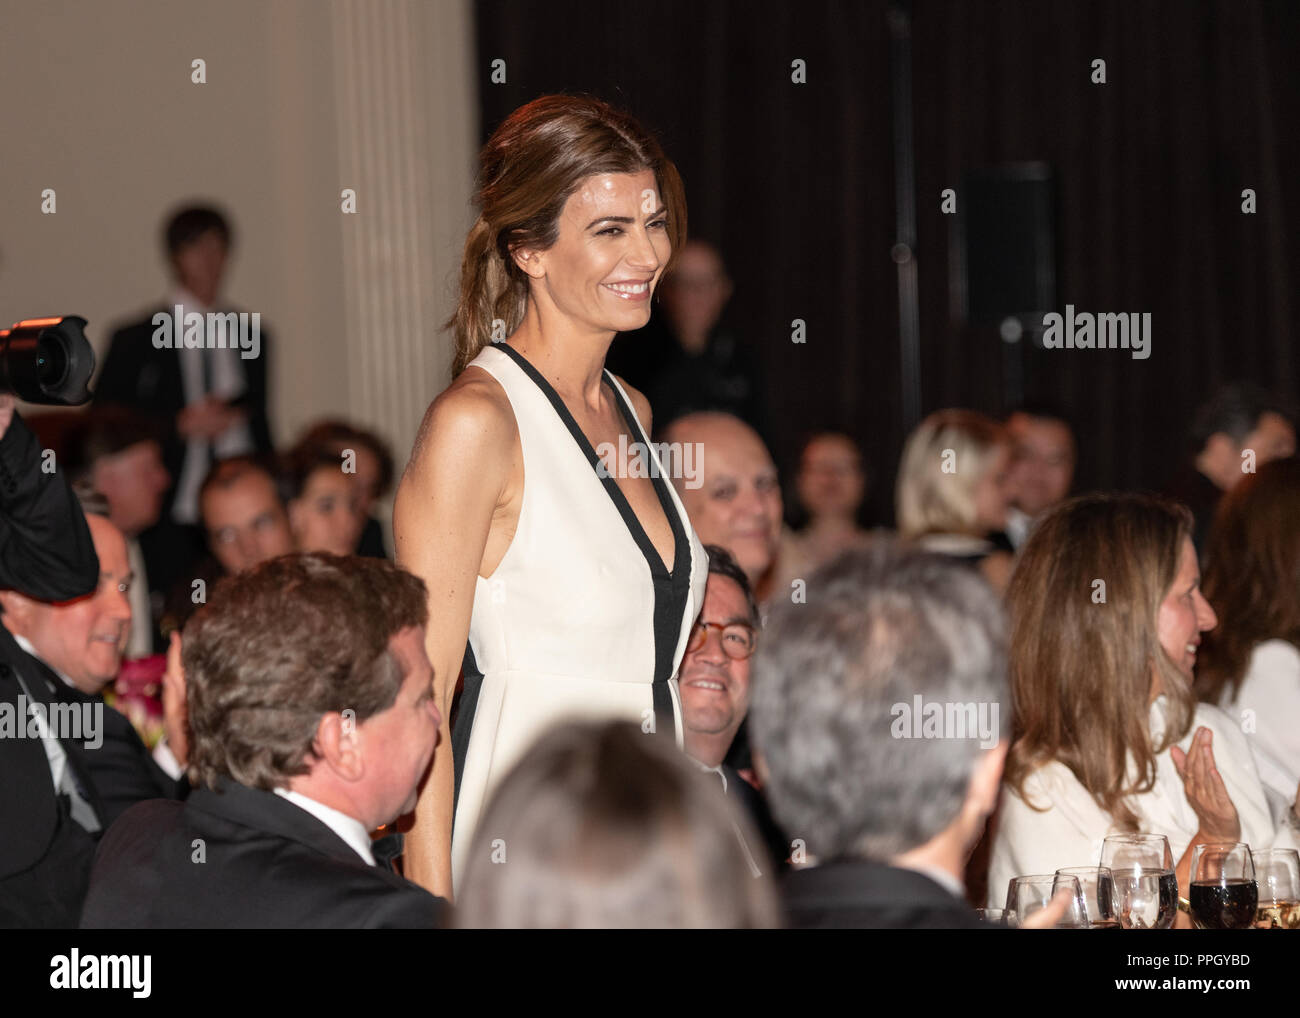 New York, USA, 24 September 2018.  Argentine First Lady Juliana Awada acknowledges applause at the  Gala dinner where her husband President Mauricio Macri received the Atlantic Council's Global Citizen Award,  at Cipriani Wall Street in New York City.  Photo by Enrique Shore Credit: Enrique Shore/Alamy Live News Stock Photo